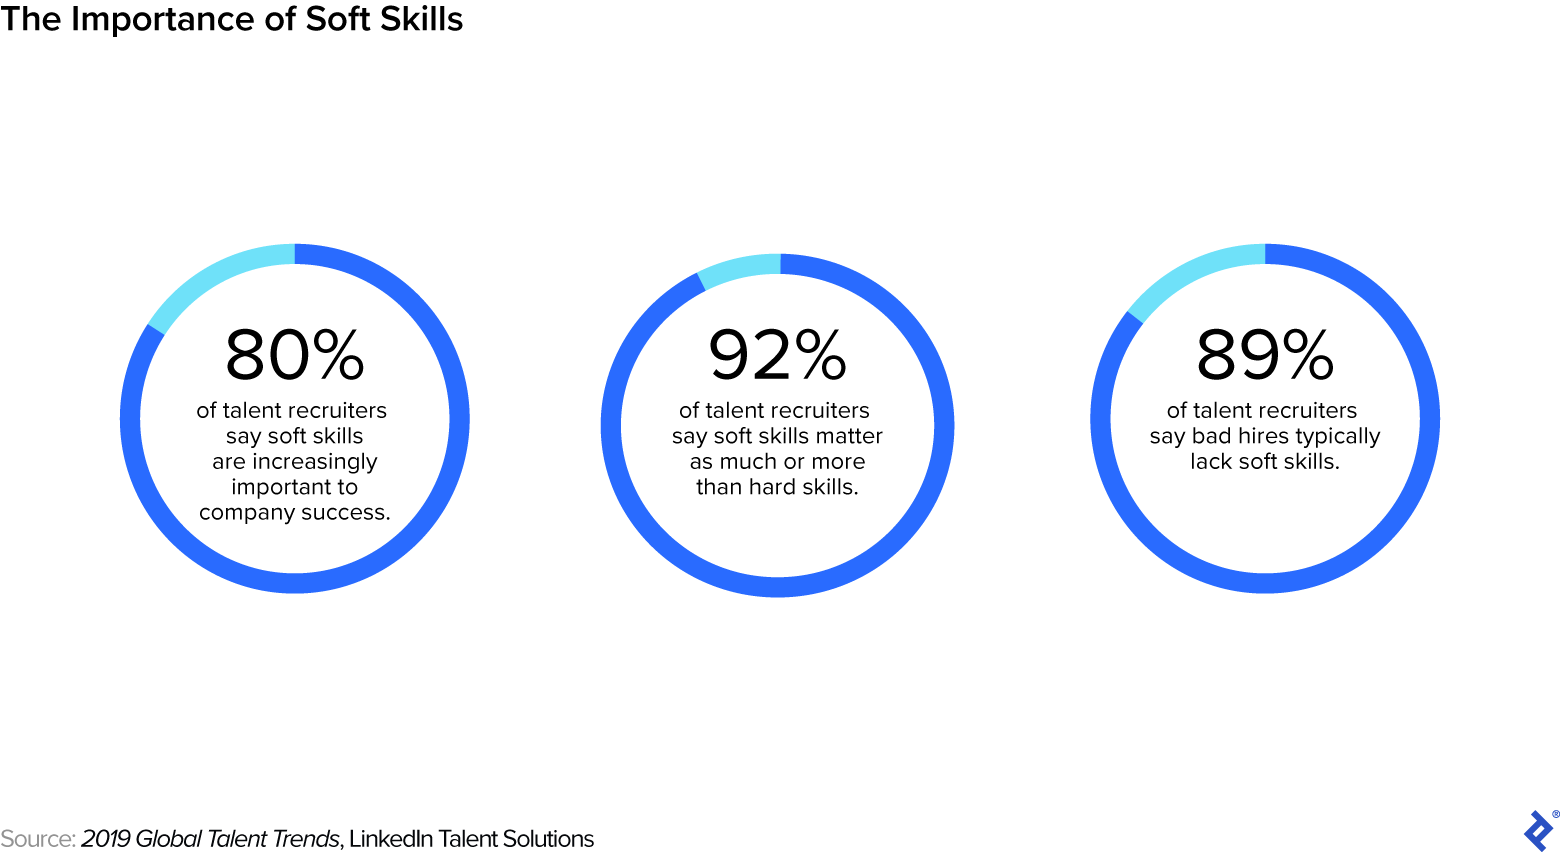 An infographic titled “The Importance of Soft Skills” displays survey data collected by LinkedIn's 2019 Global Talent Trends report. There are three circles. In the first, 80% of respondents say soft skills are increasingly important to company success; in the second, 92% of respondents say soft skills matter as much or more than hard skills; in the third, 89% of respondents say bad hires typically lack soft skills.